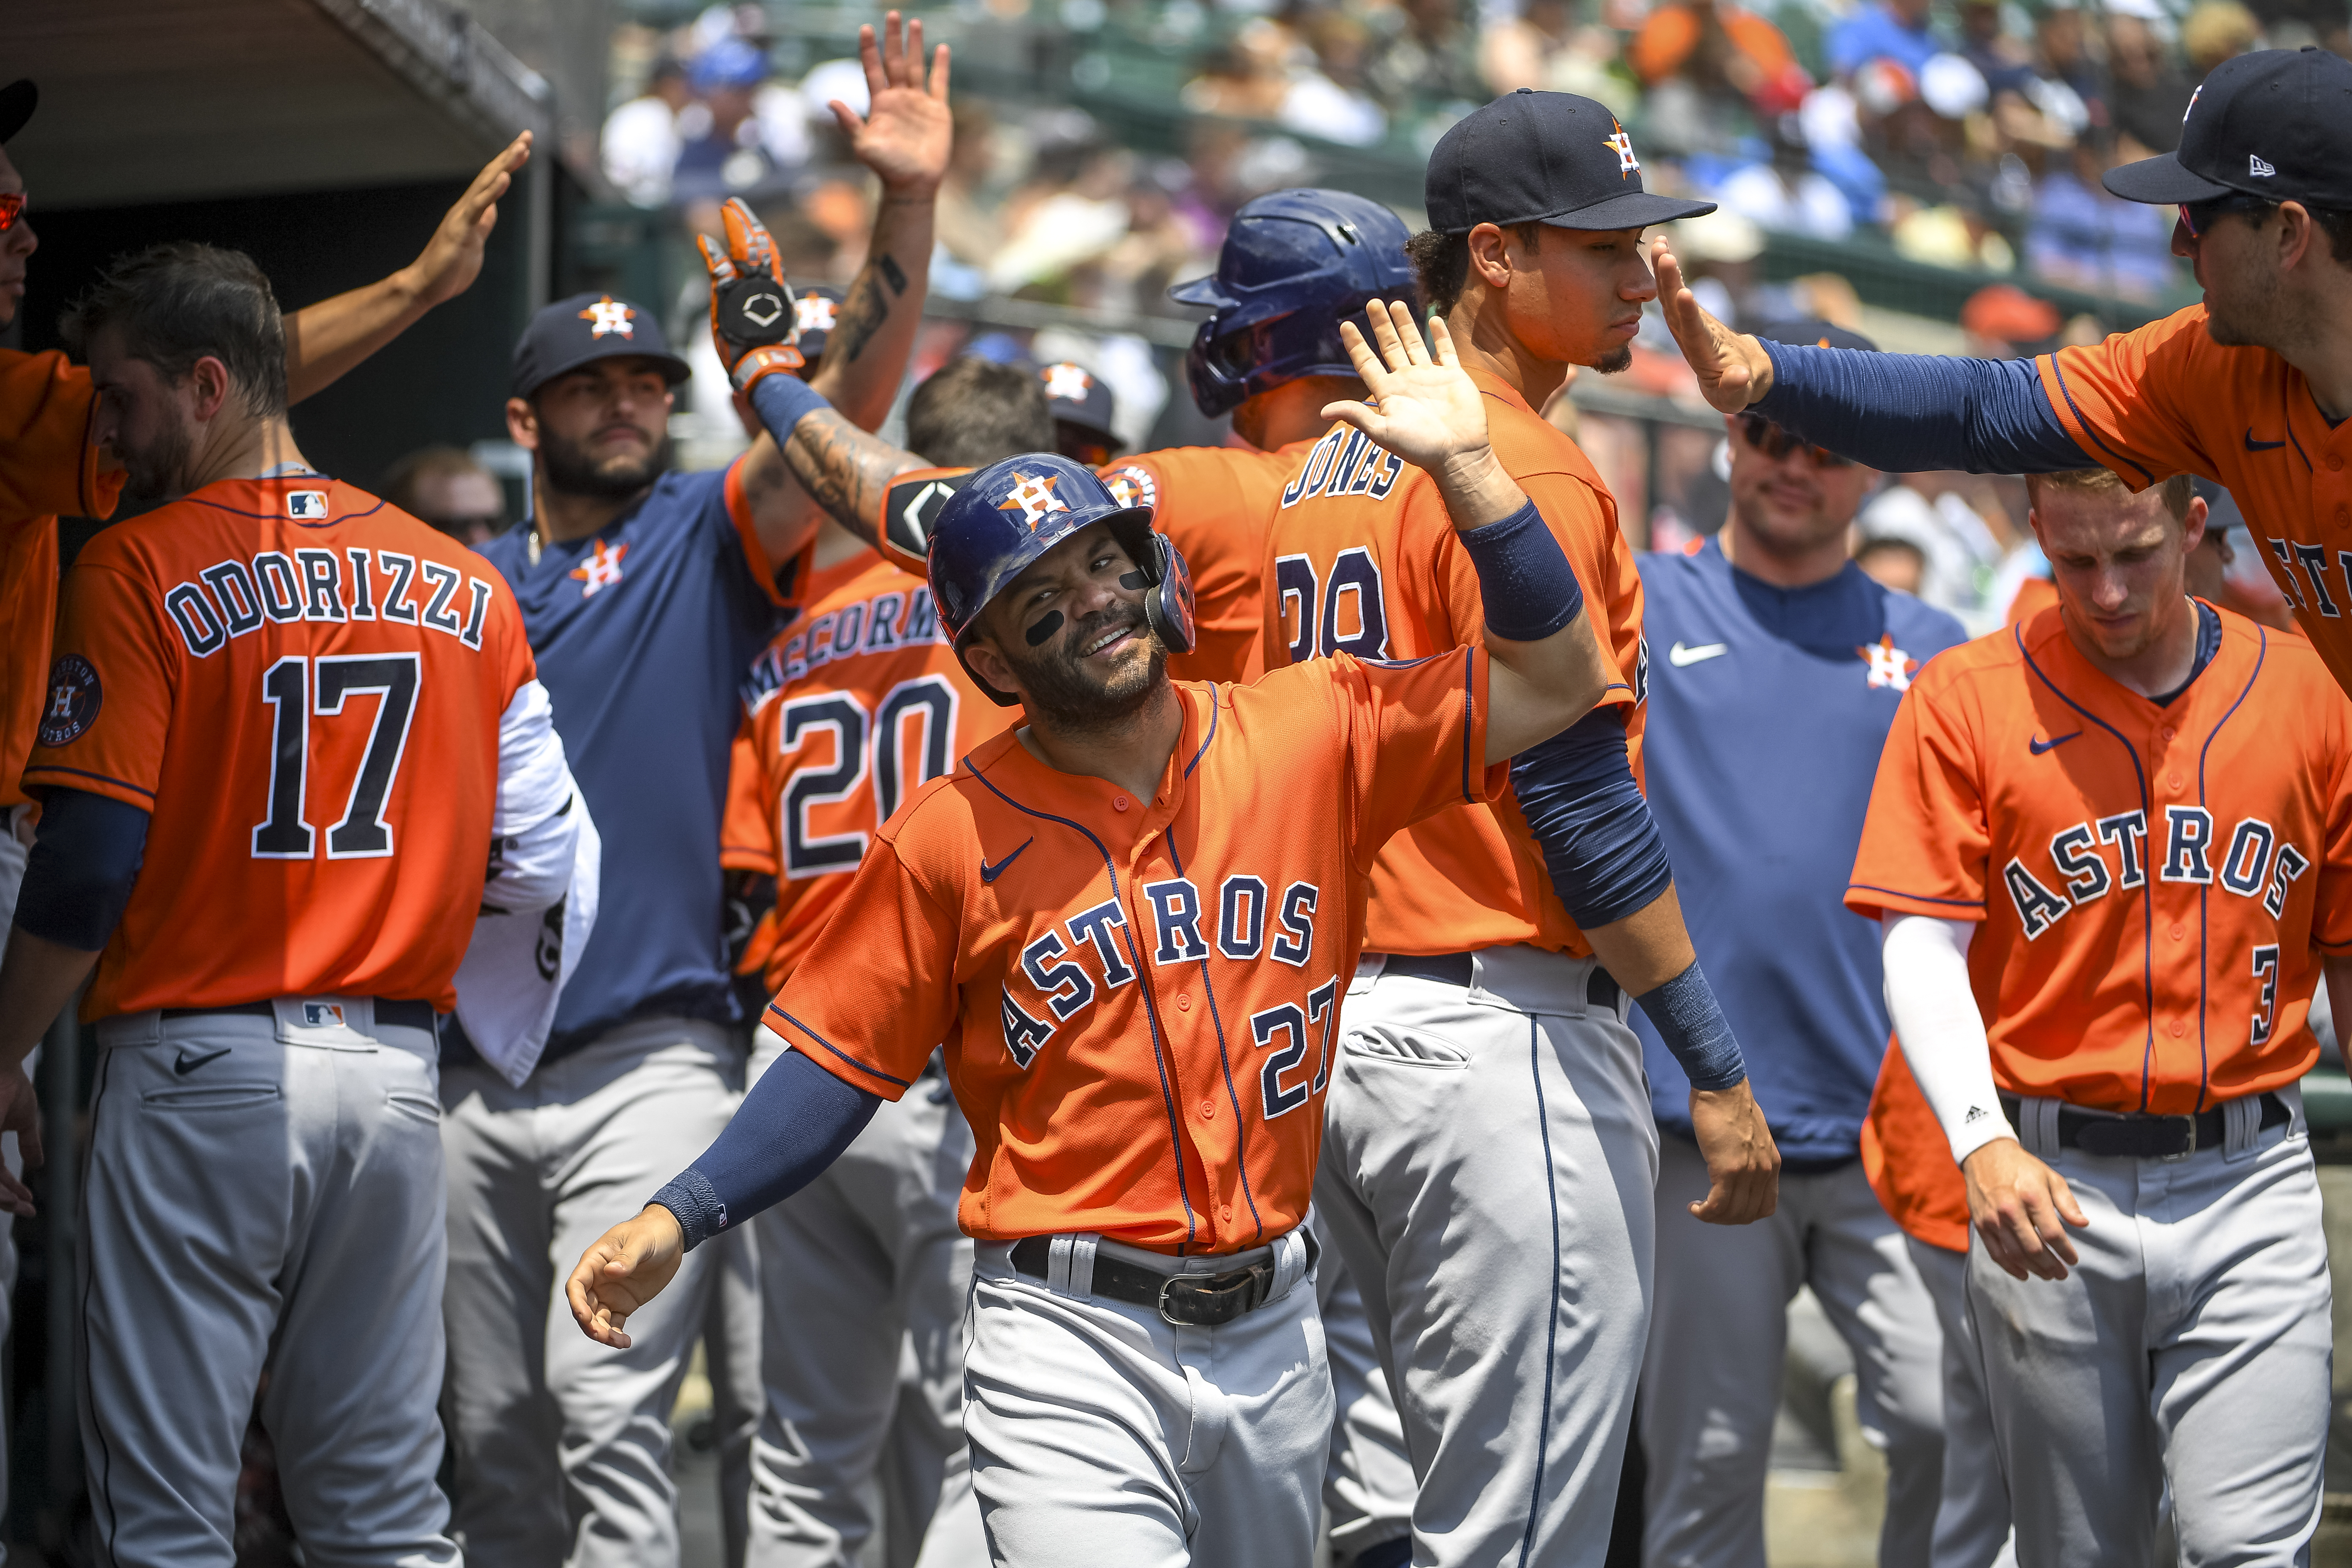 1 Year After Cheating Bombshell, Red-Hot Astros Are Reclaiming Their Elite Reput..